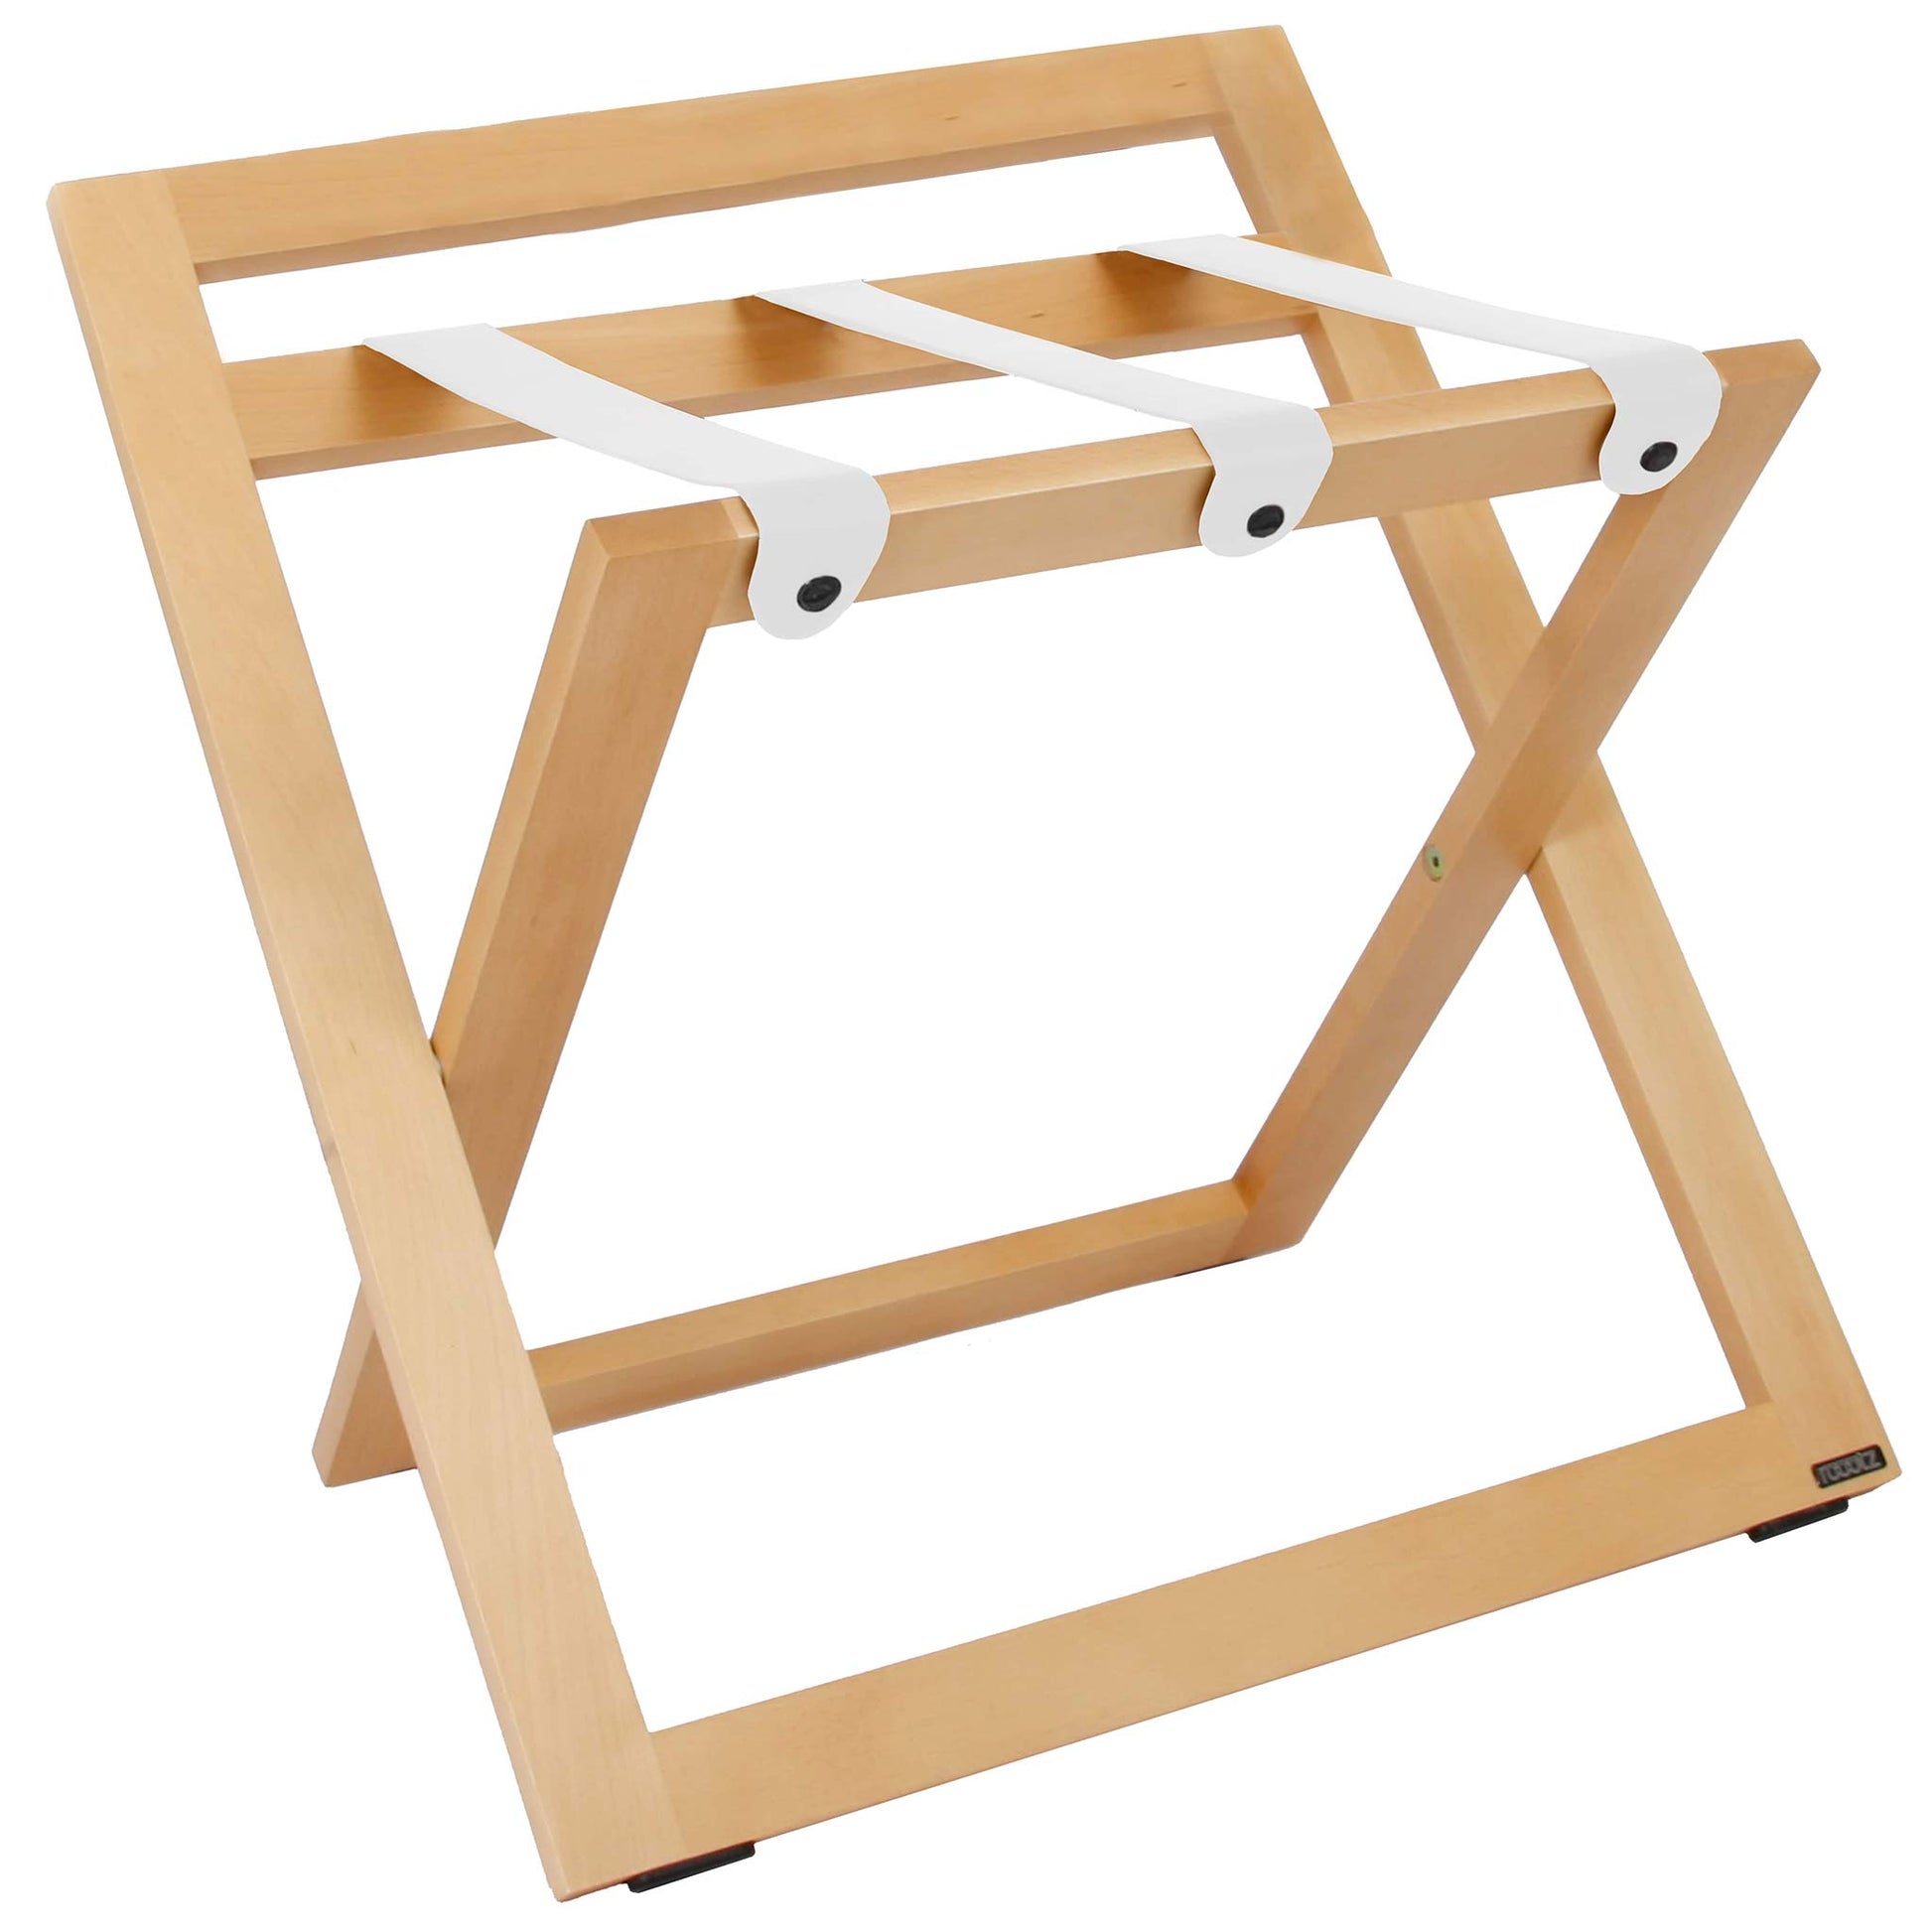 Roootz compact natural wooden hotel luggage rack with white leather straps and backstand